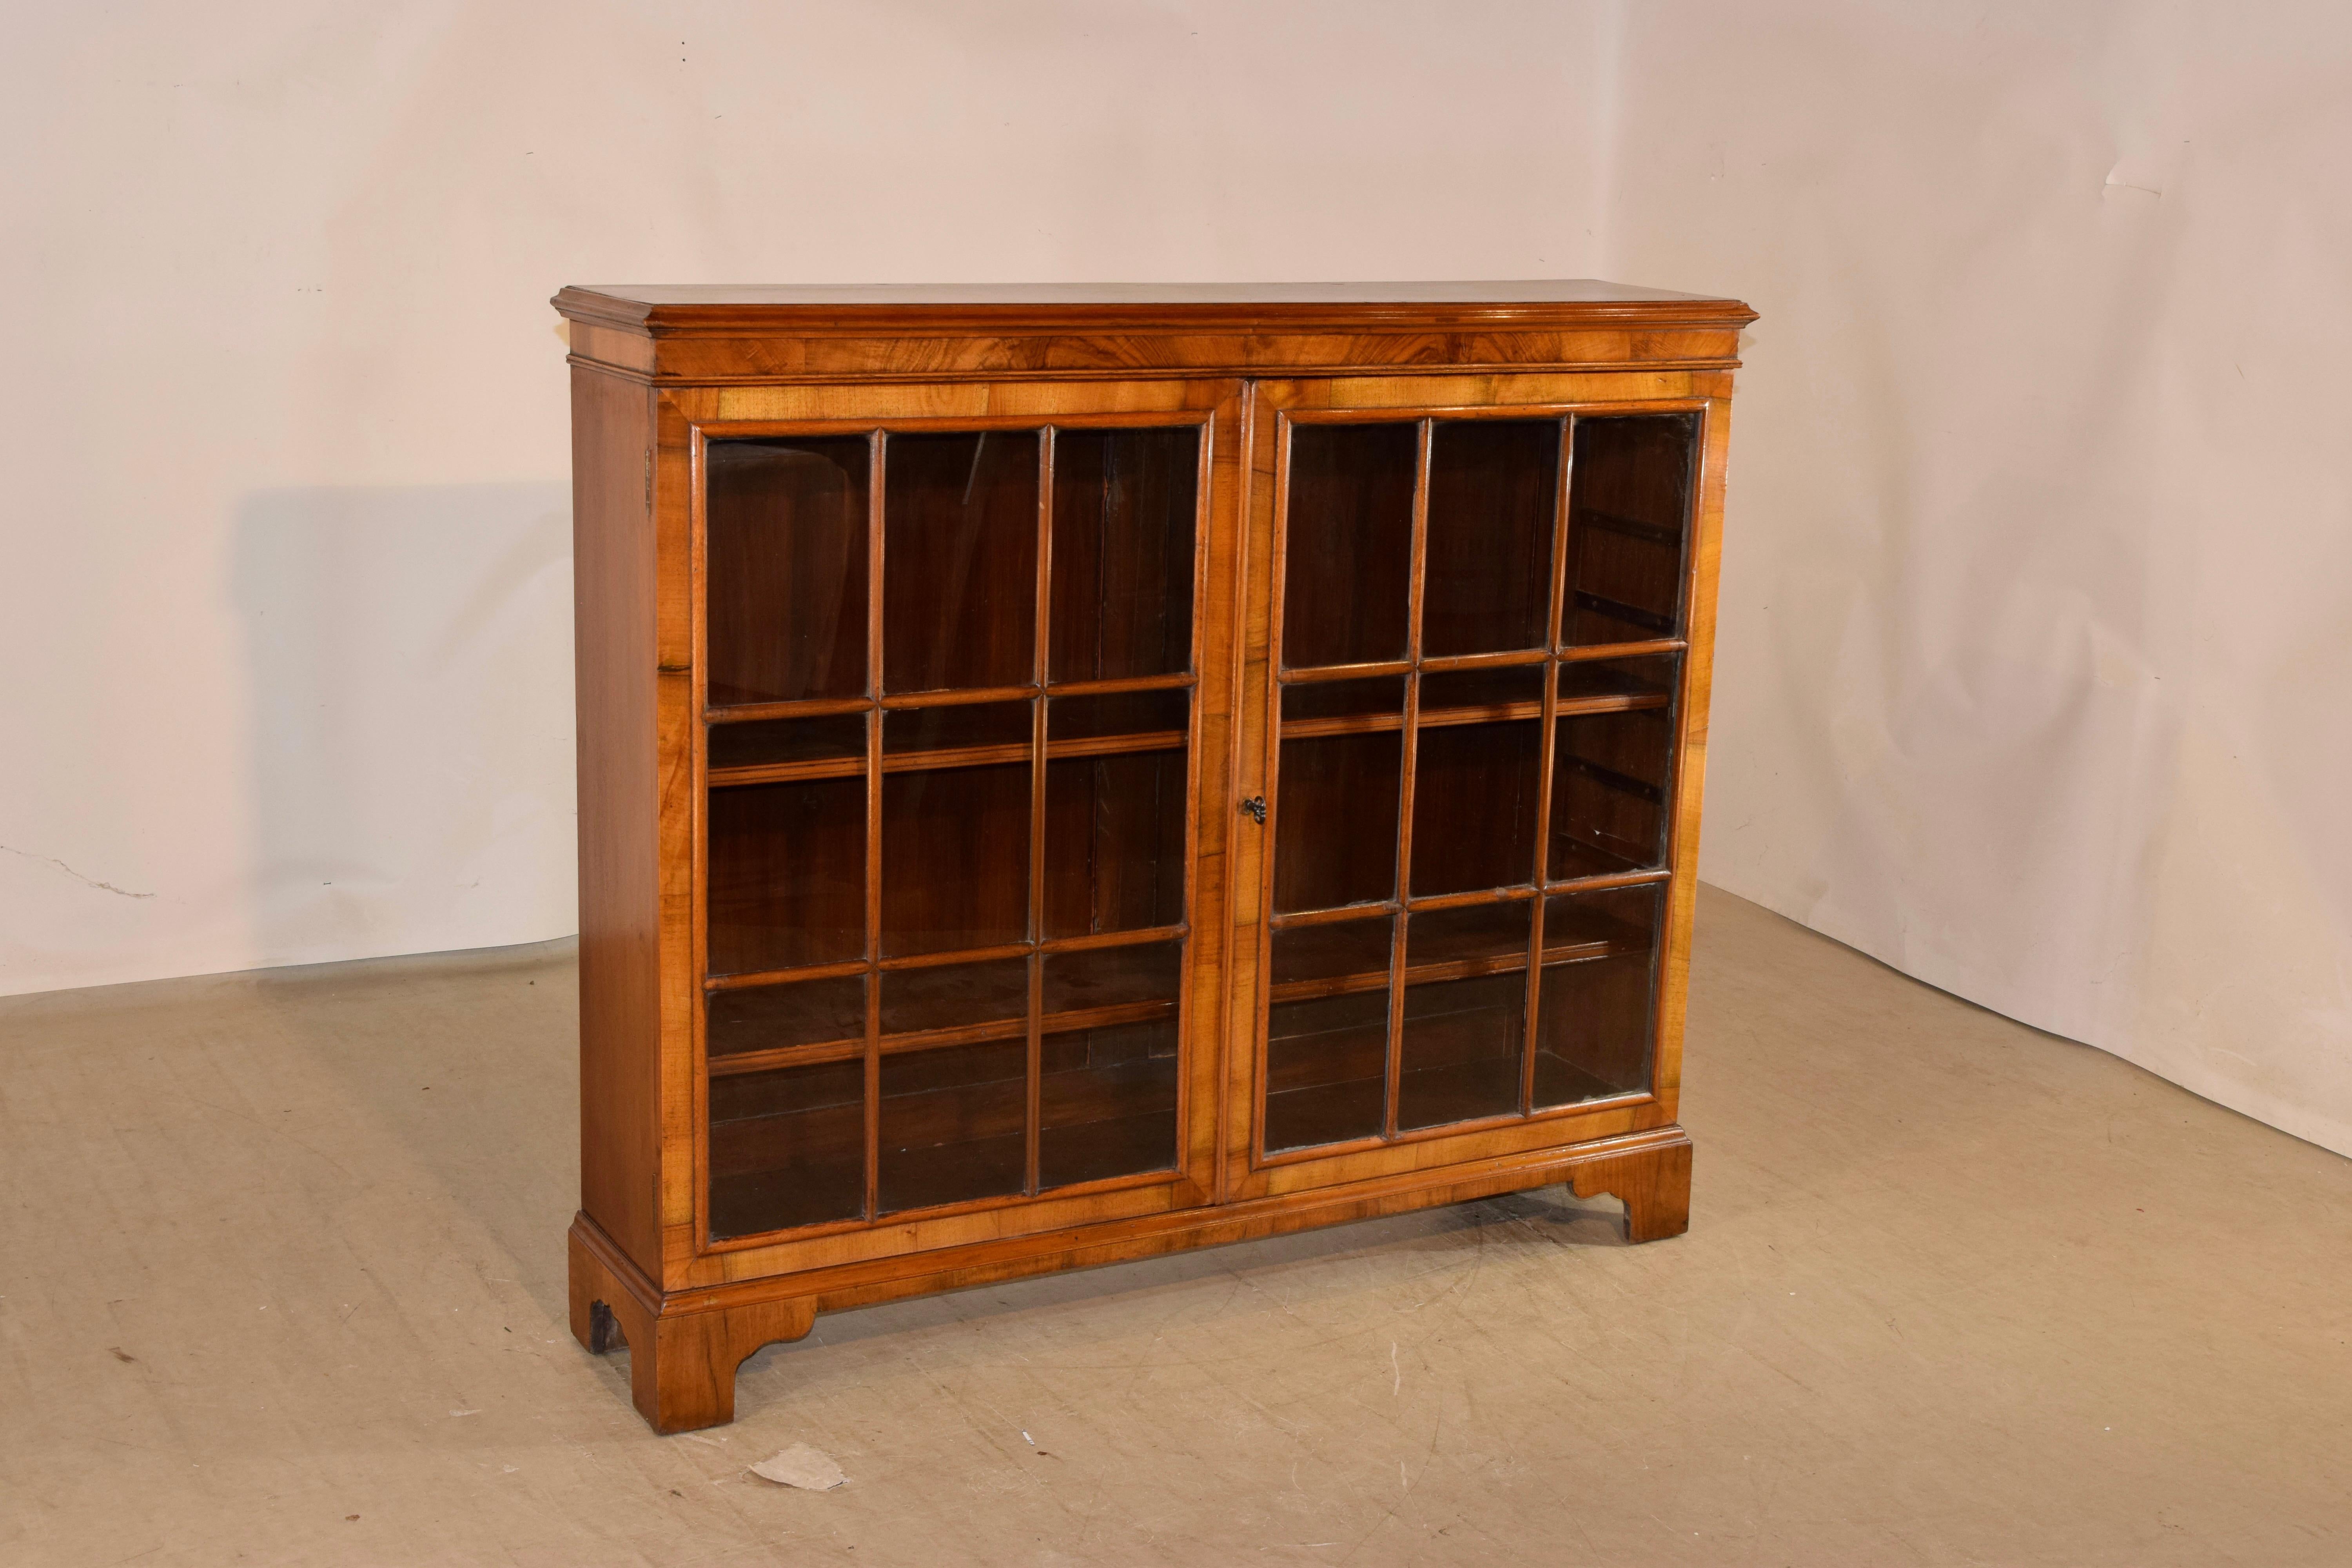 Edwardian walnut bookcase from England, circa 1900. The top has been beautifully book matched and banded with a beveled edge as well, following down to a simple apron with lovely graining patterns over two doors with paneled glass. The sides are